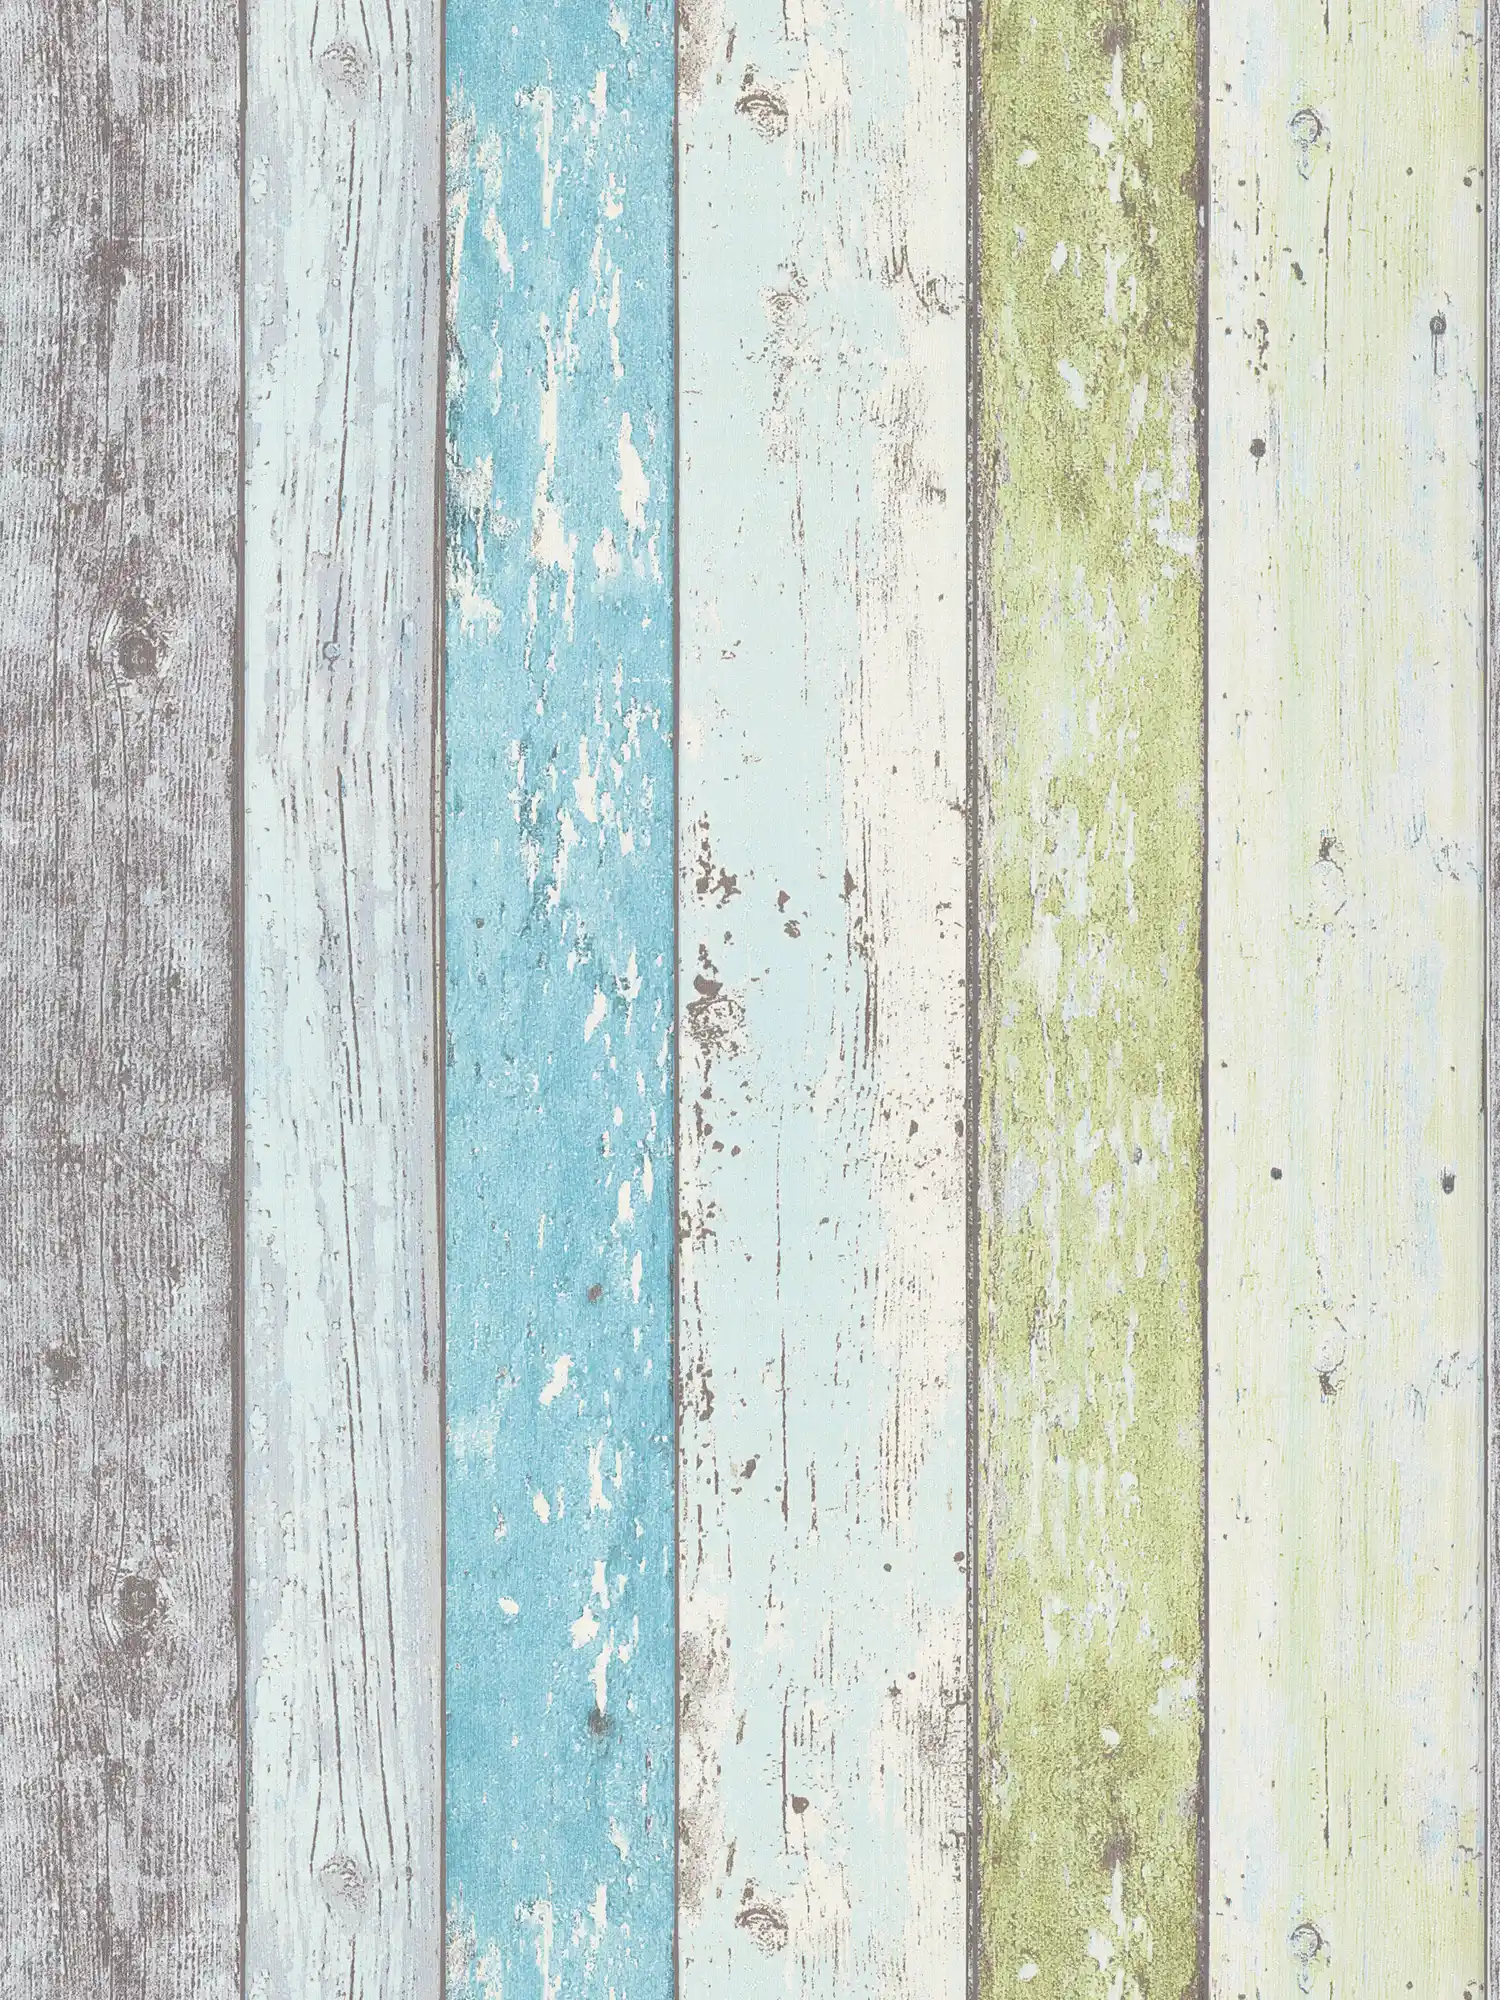         Wood wallpaper with used look for vintage & country style - blue, green, white
    